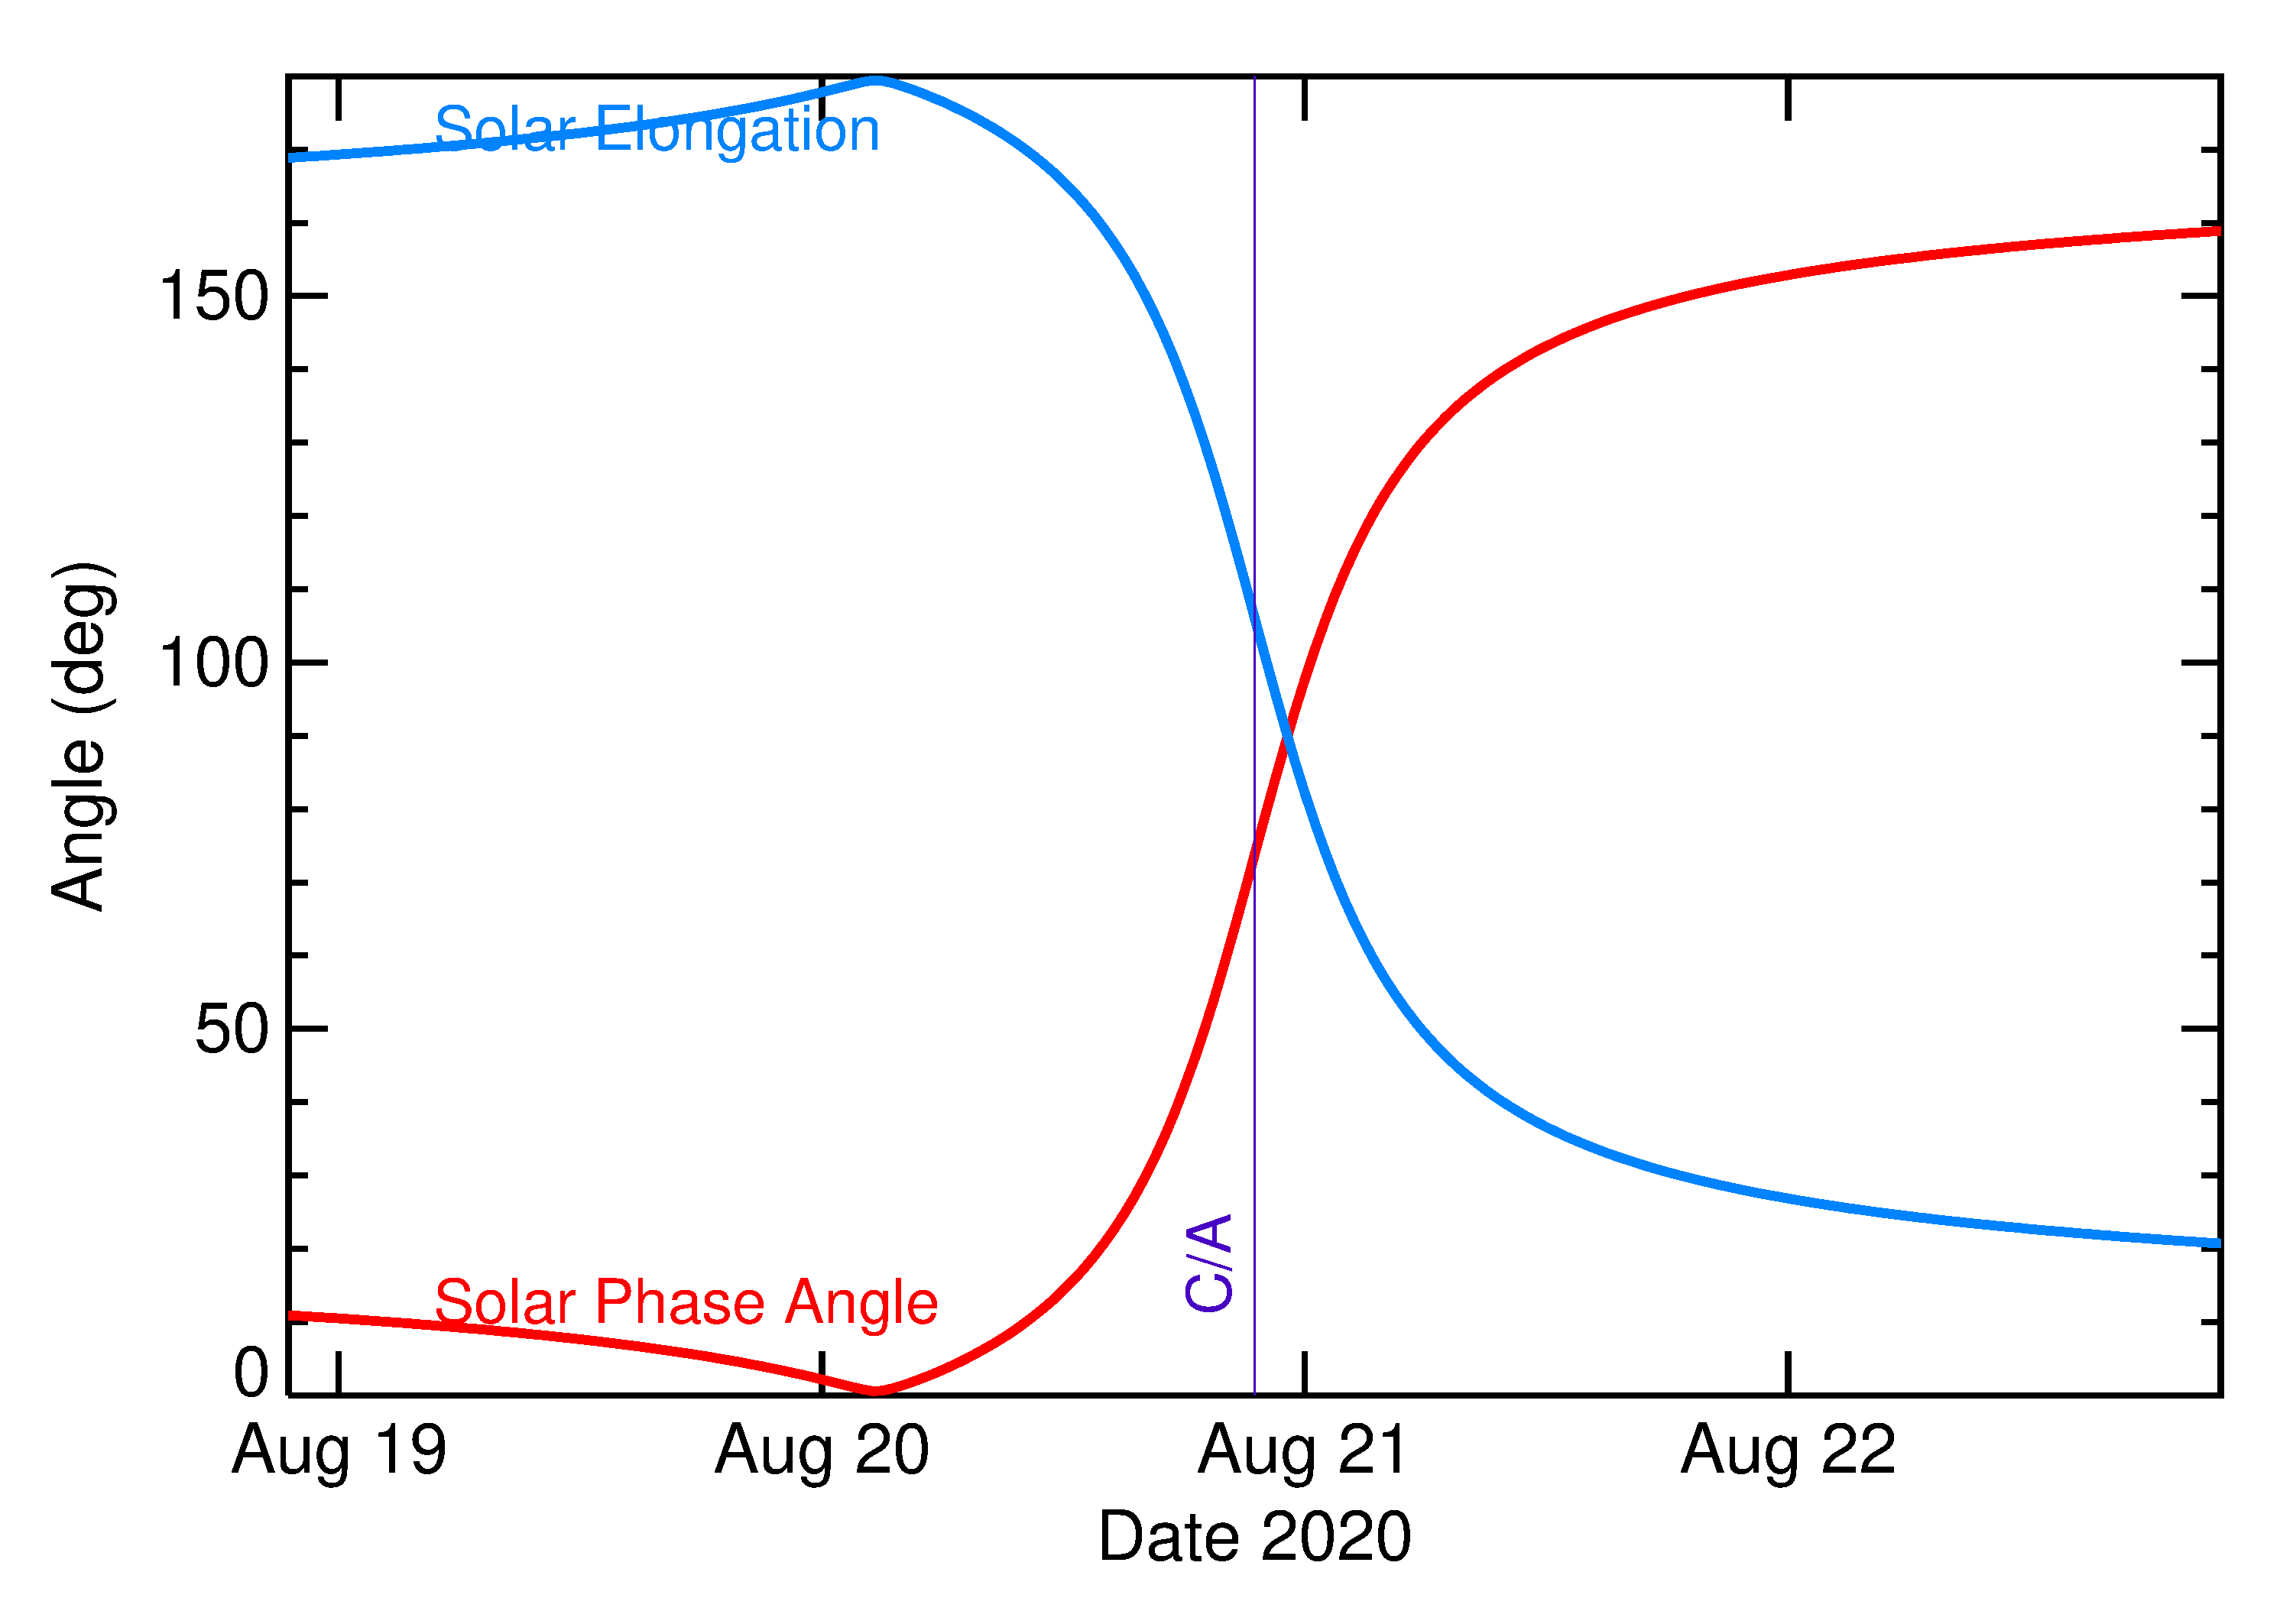 Solar Elongation and Solar Phase Angle of 2020 PY2 in the days around closest approach